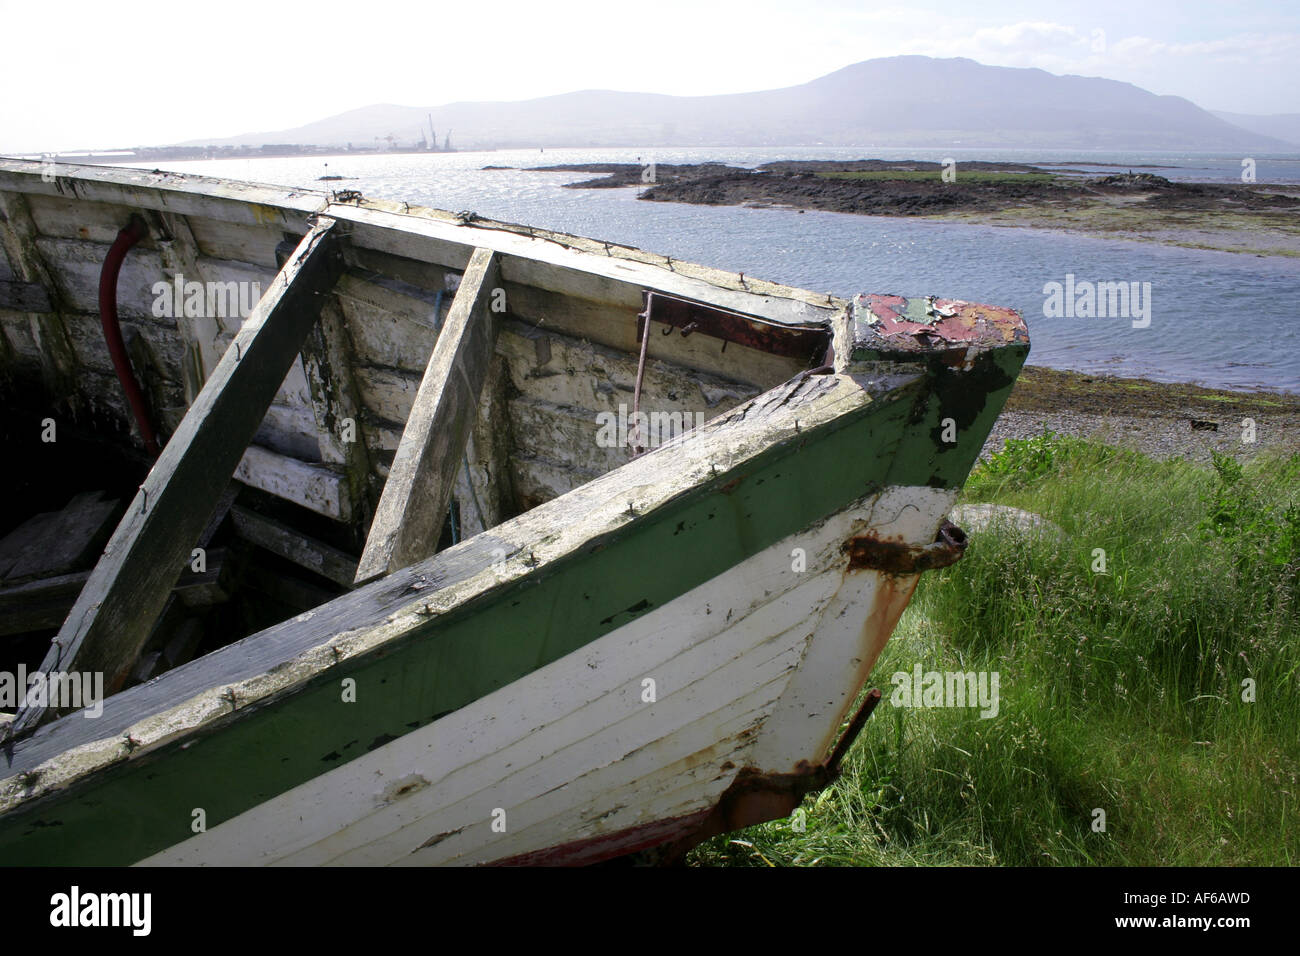 wreck of a small fishing boat on beach at Greencastle, County Down, Northern Ireland Stock Photo